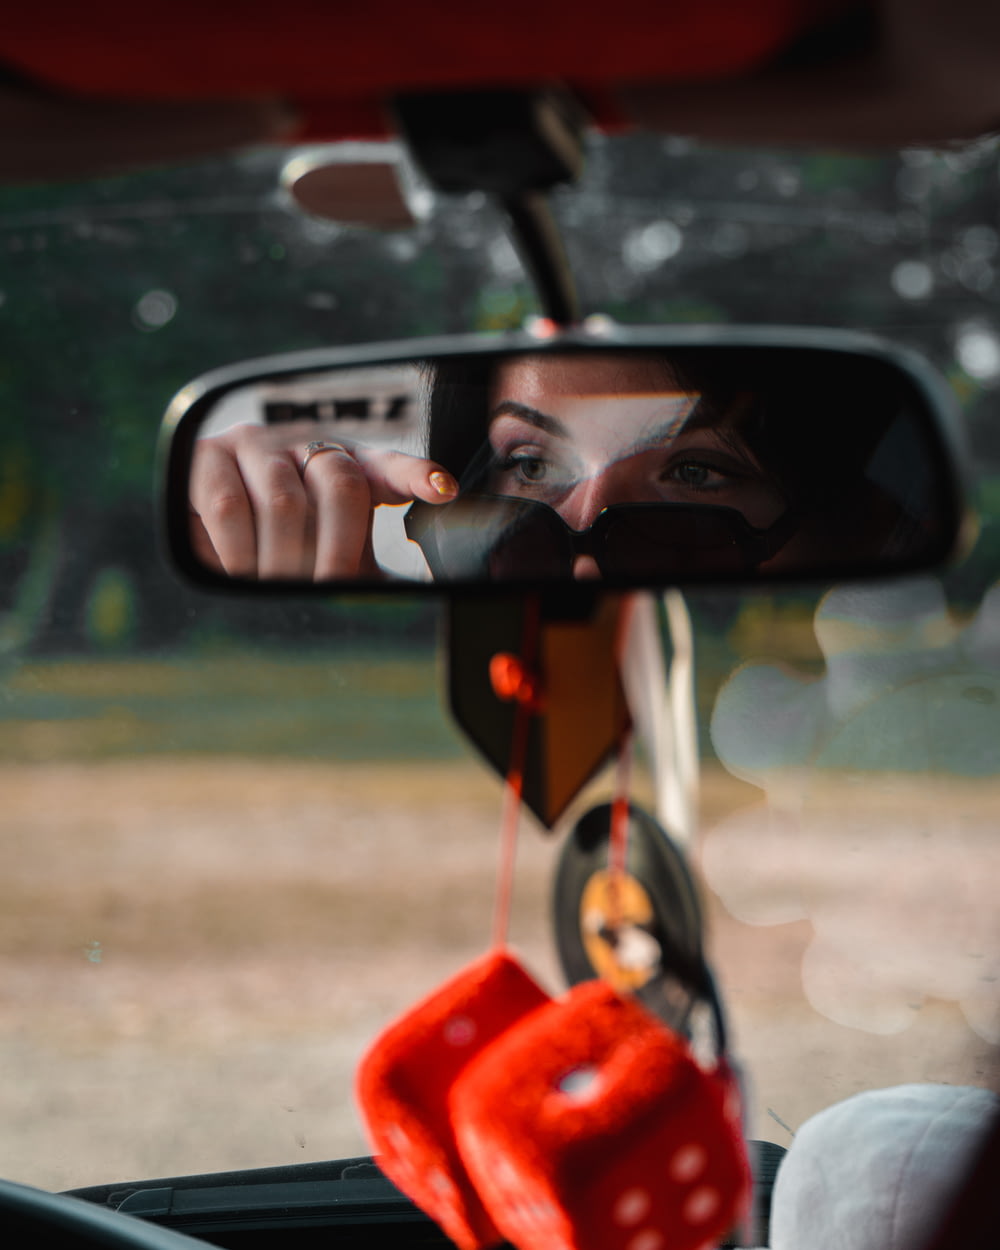 a woman's reflection in the side view mirror of a car